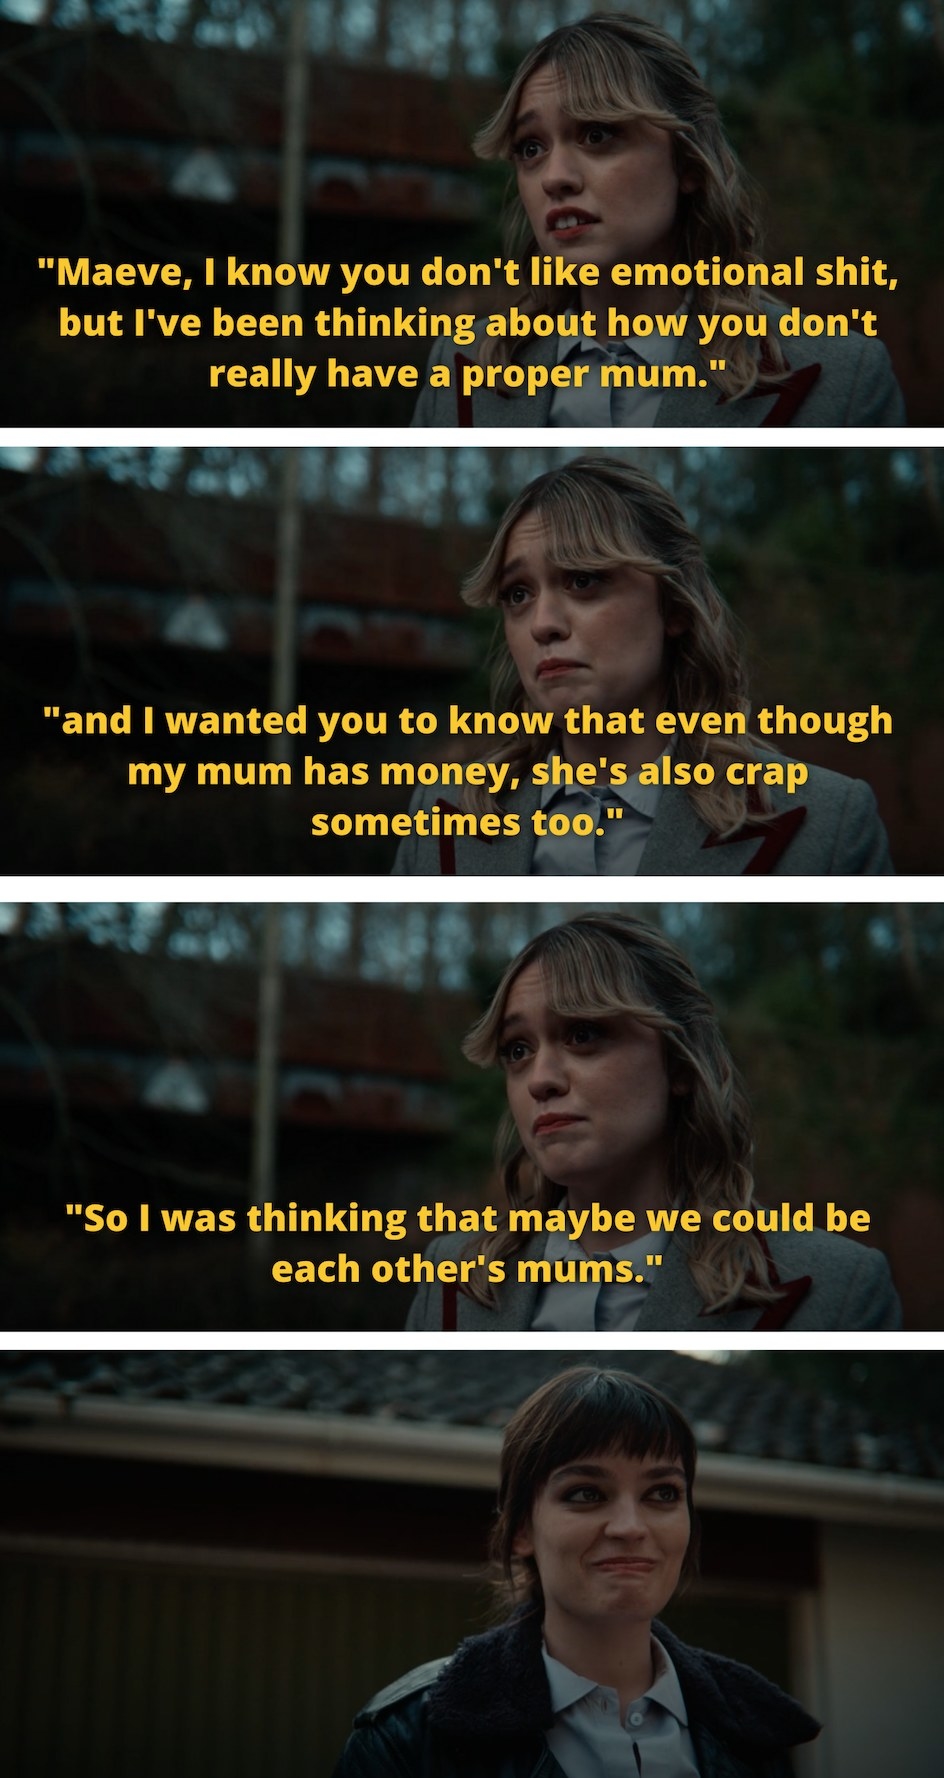 &quot;maybe we could be each other&#x27;s mum&#x27;s&quot;